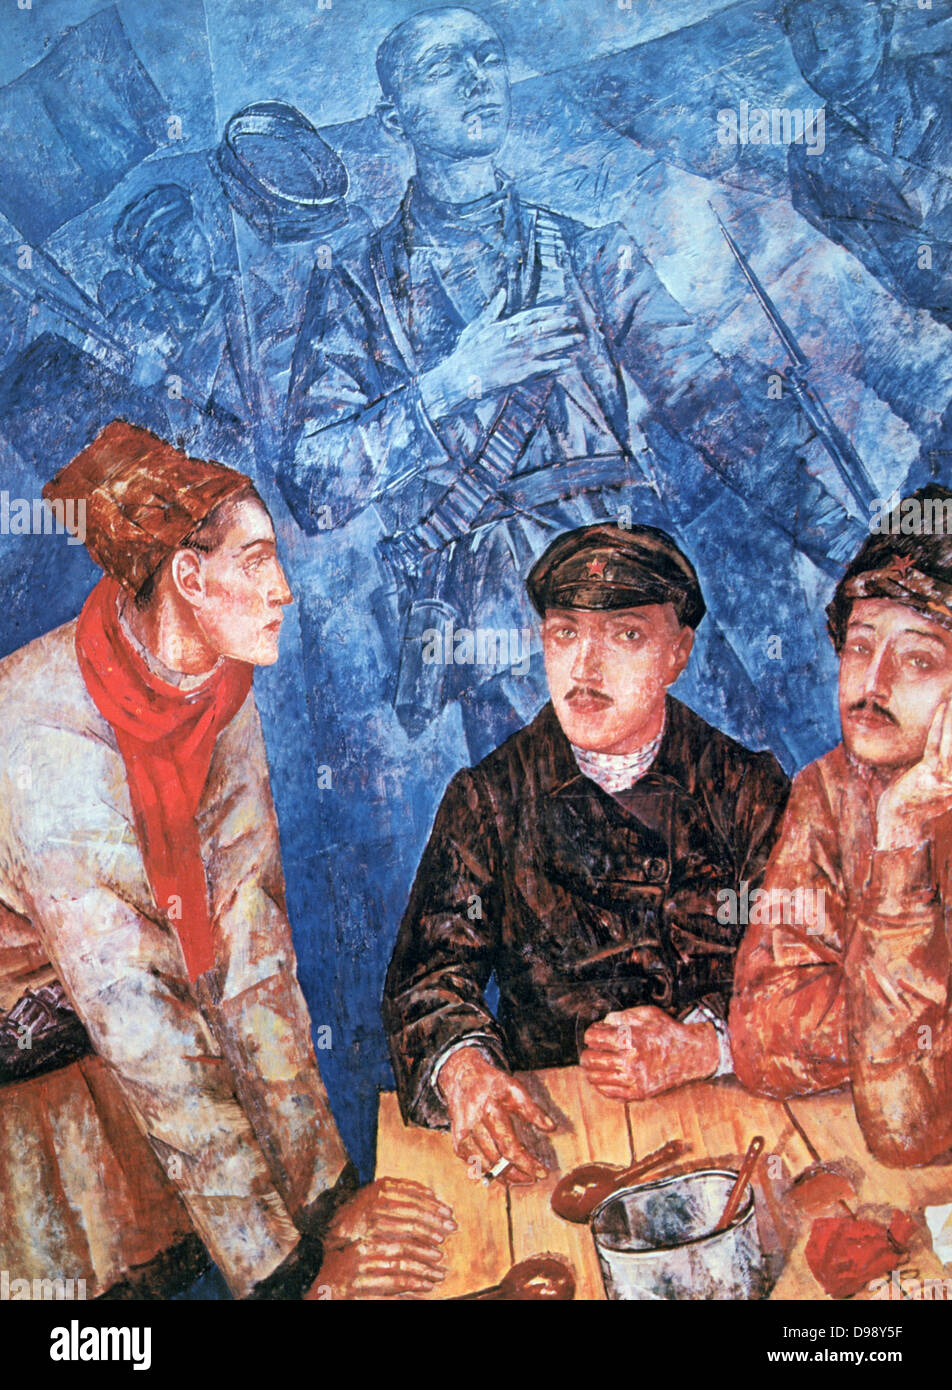 After the Battle', 1923. Oil on canvas. Kuzma Petrov-Vodkin (1878-1939) Russian painter. Three dazed,sombre-faced combatants smoking and eating around a table. In background are ghostly forms of dead fighters. Stock Photo